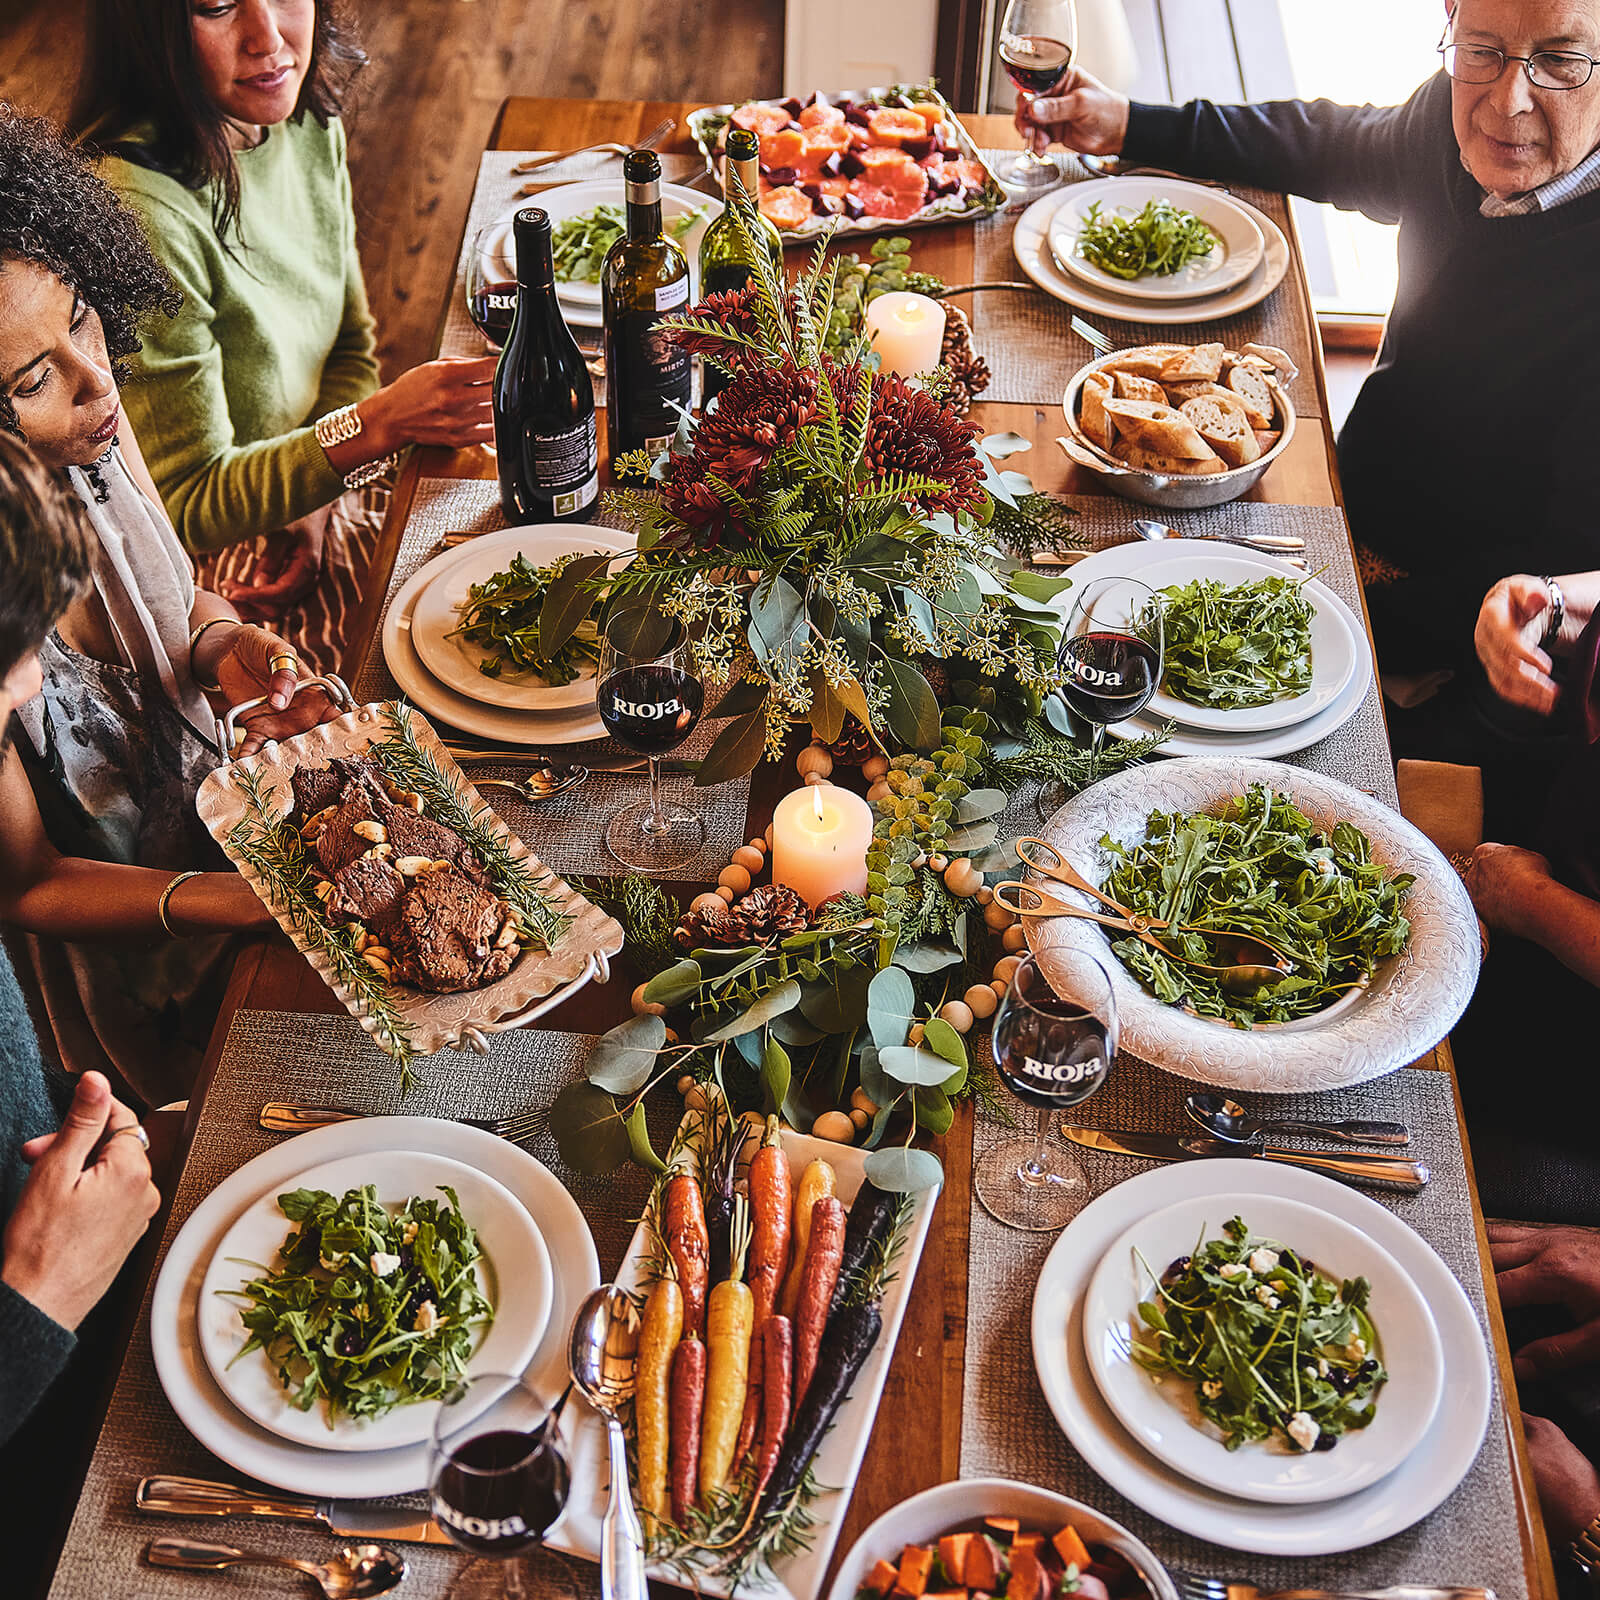 Holiday Gathering with food and wine at a table